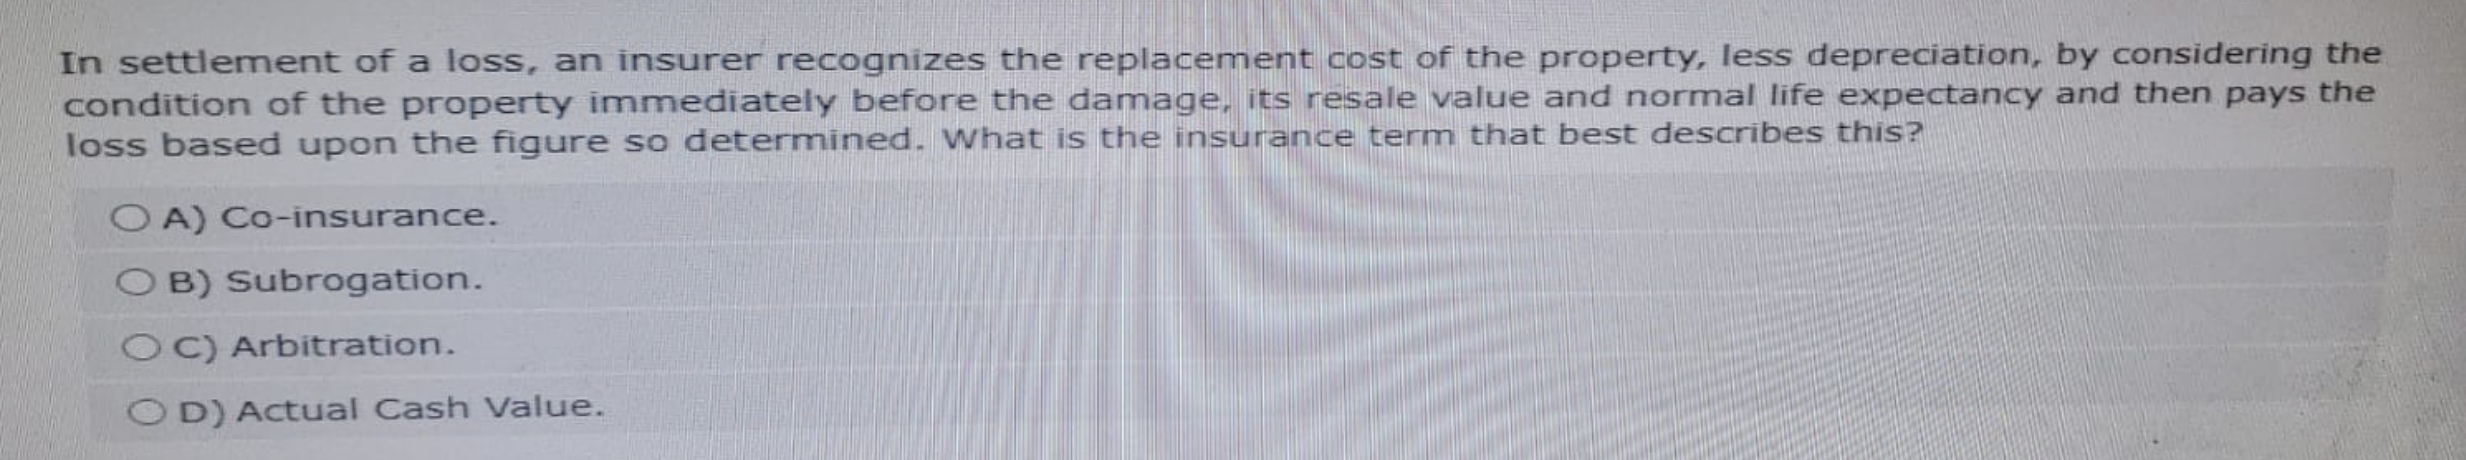 In settlement of a loss, an insurer recognizes the replacement cost of the property, less depreciation, by considering the
condition of the property immediately before the damage, its resale value and normal life expectancy and then pays the
loss based upon the figure so determined. What is the insurance term that best describes this?
OA) Co-insurance.
OB) Subrogation.
OC) Arbitration.
OD) Actual Cash Value.